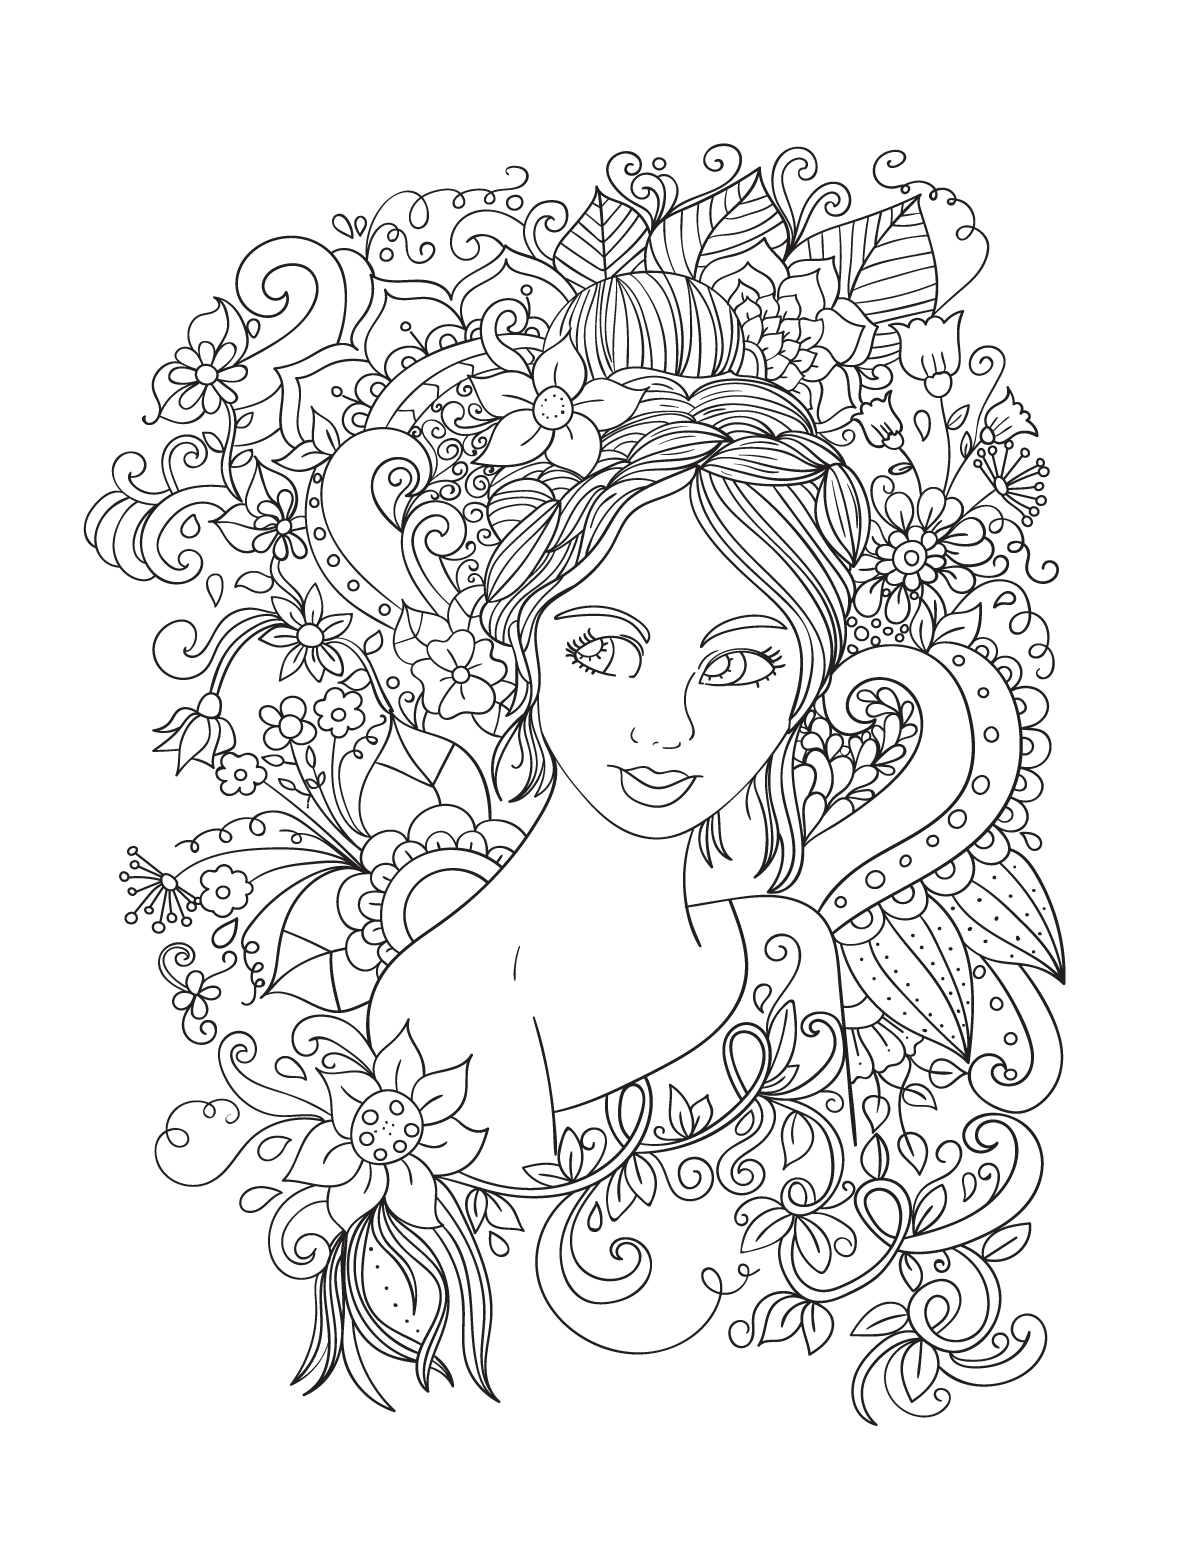 Digital Coloring Book Pages Girls And Flowers Vol 1 By Erikavectorika Thehungryjpeg Com